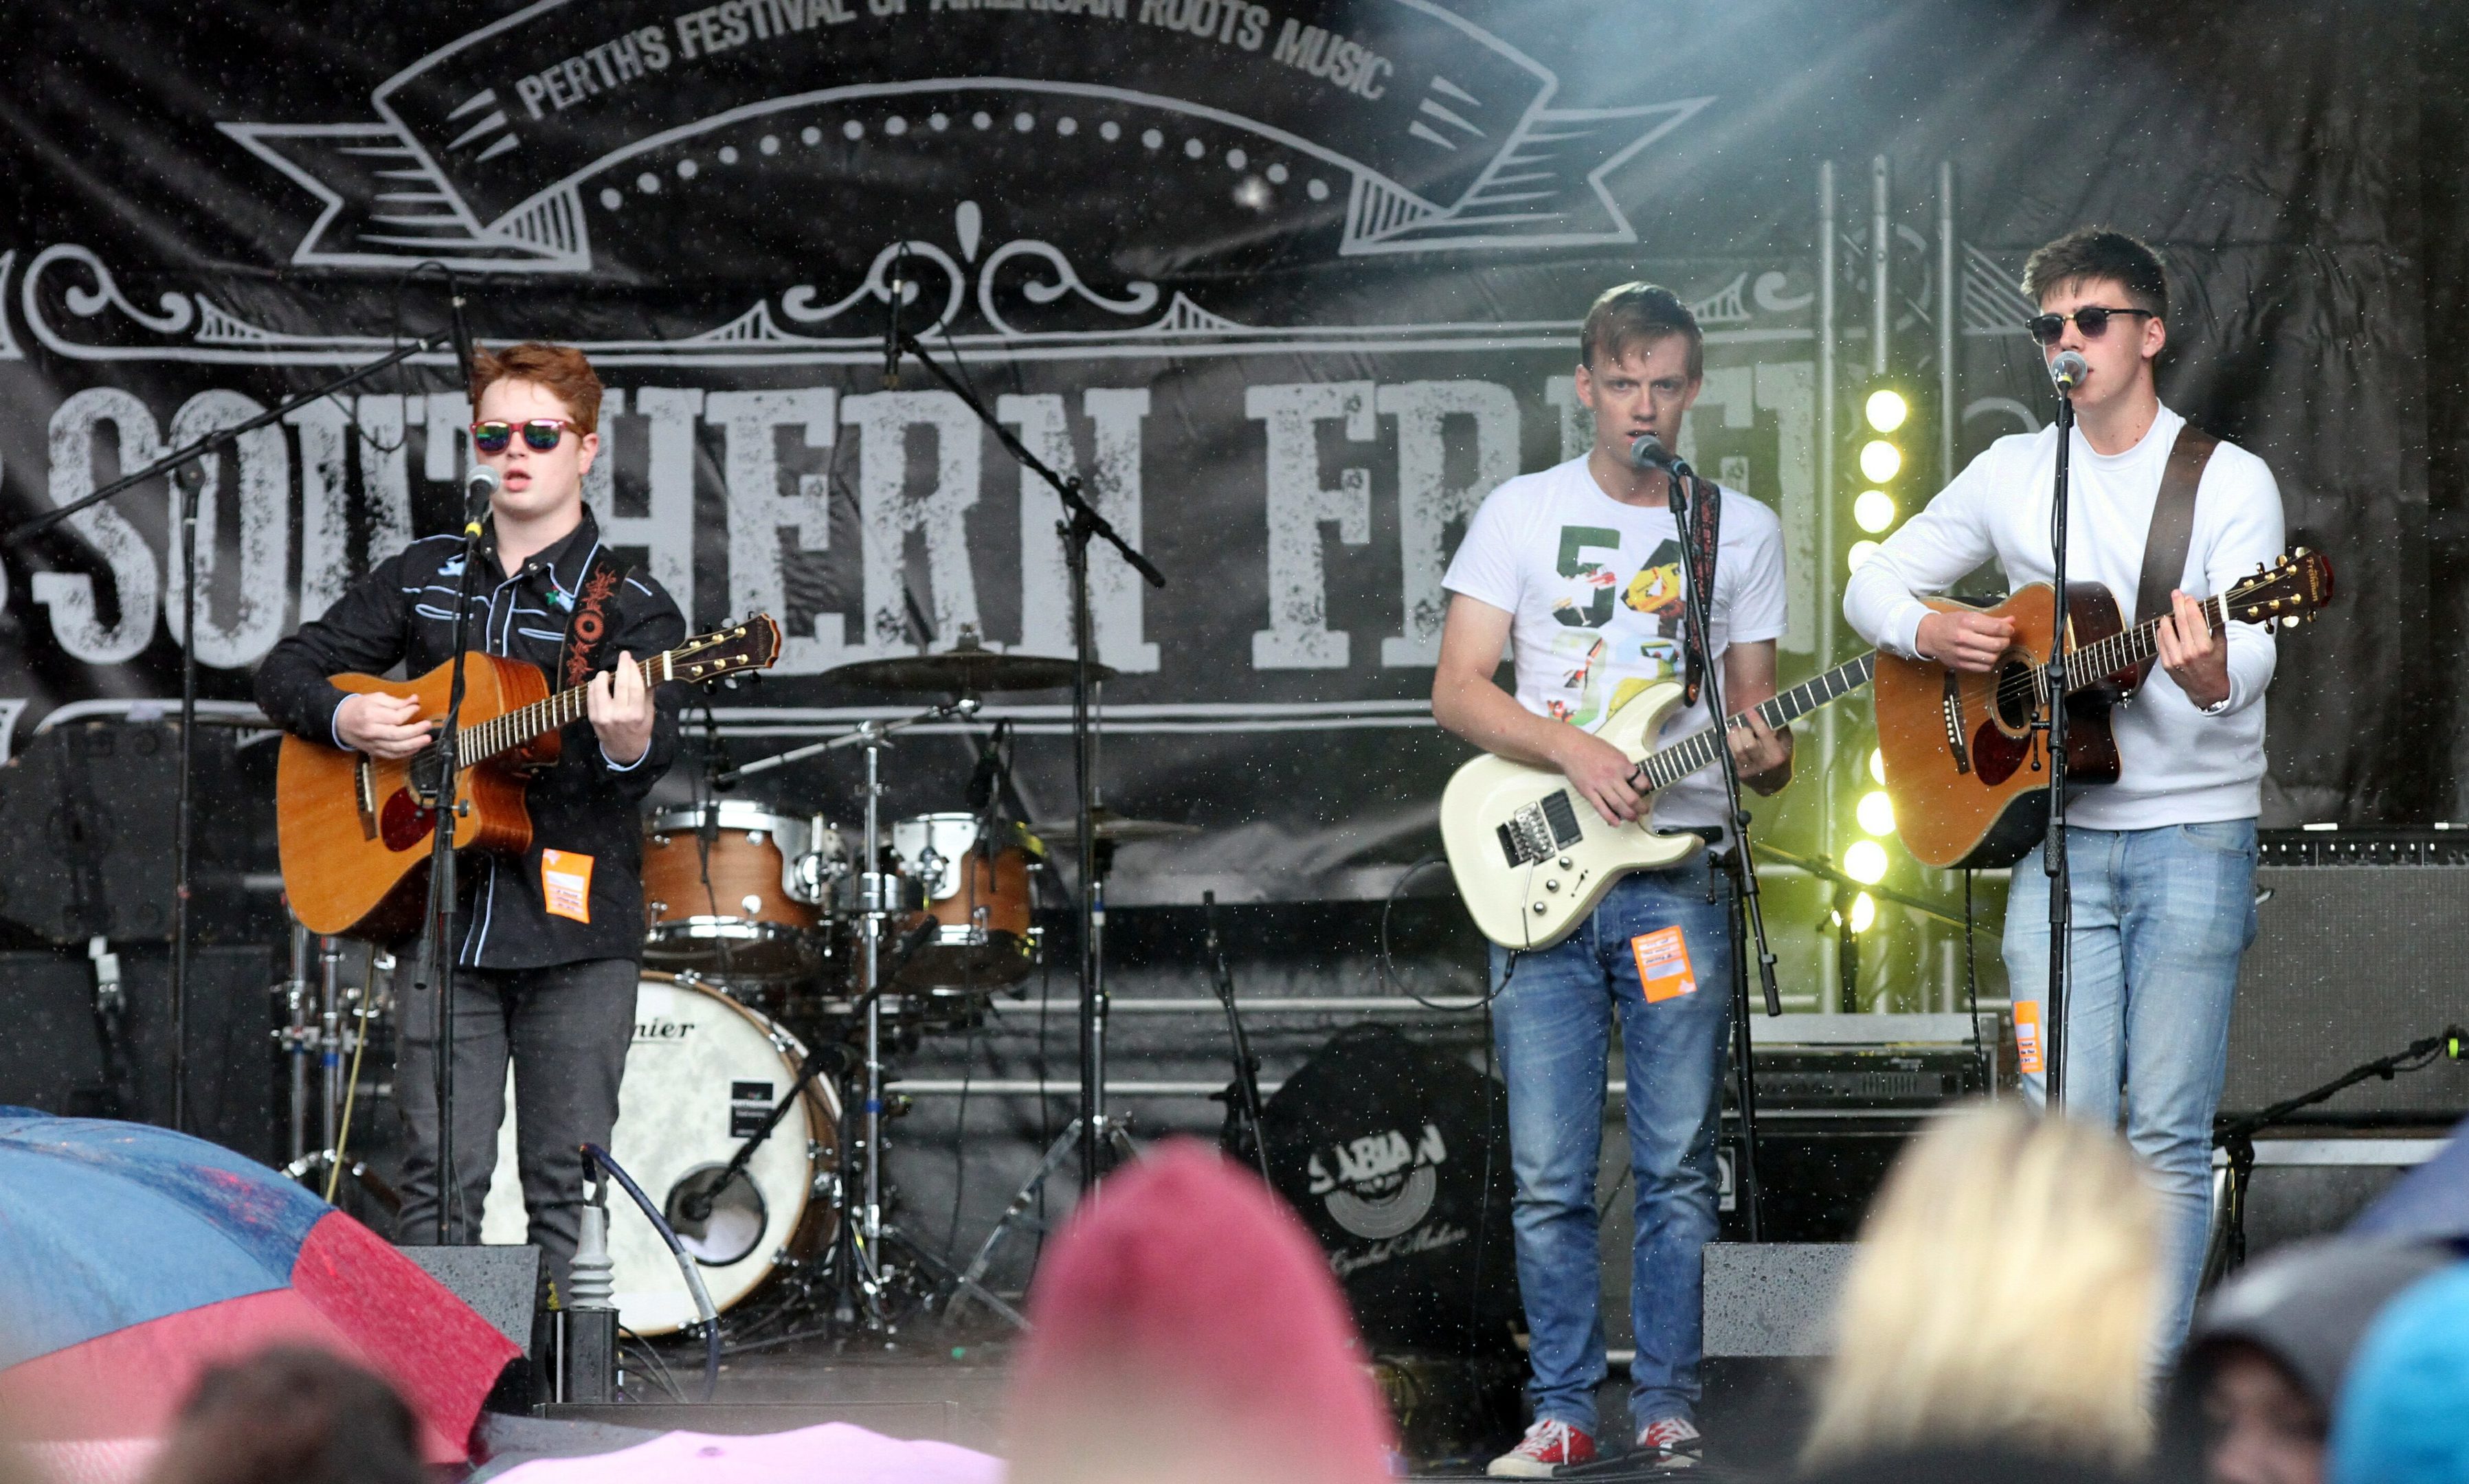 The outdoor stage proved a major draw at the 10th annual Southern Fried Festival